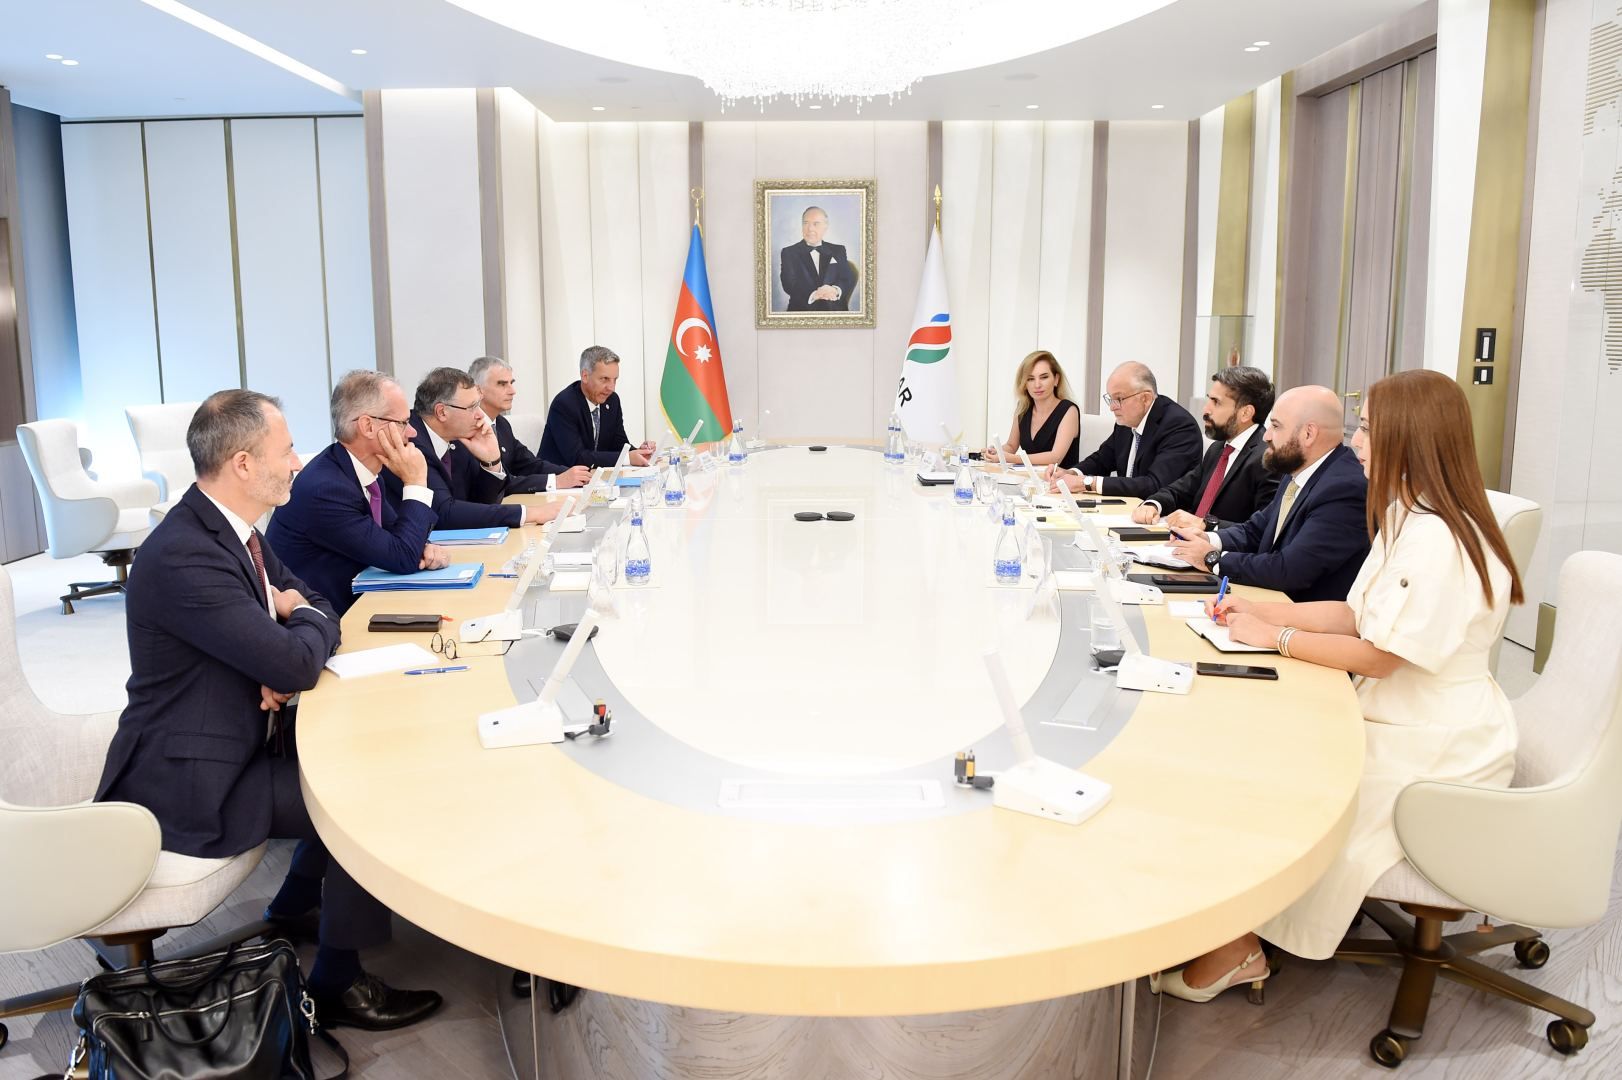 President of SOCAR receives CEO of TotalEnergies [PHOTOS]